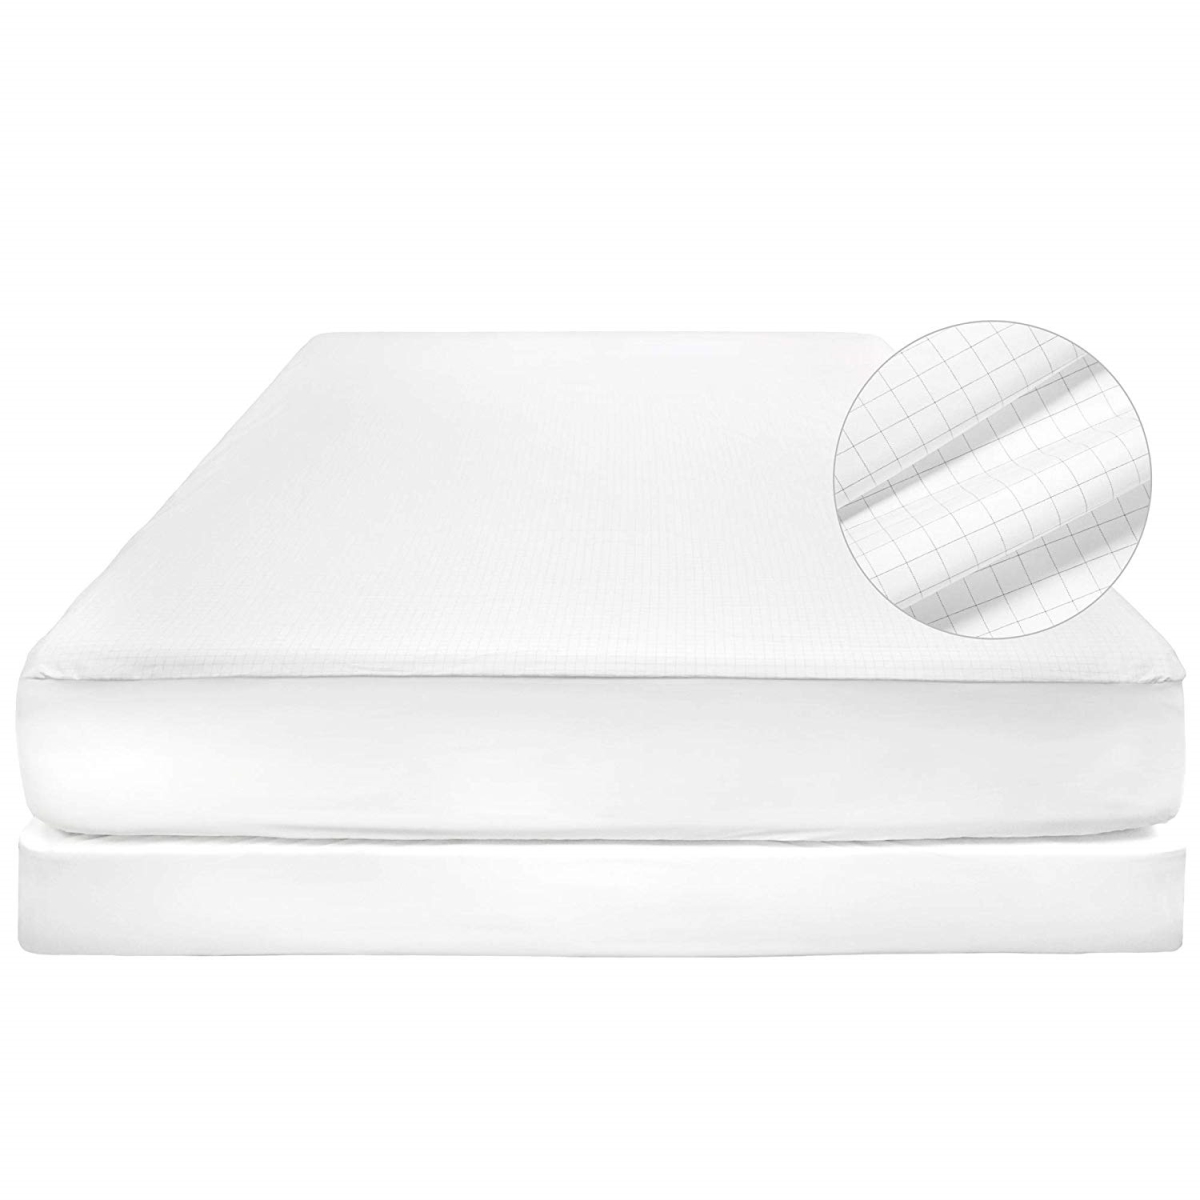 Picture of Westex 733398 Sleep Solutions by Carbon-Infused Waterproof Mattress Protector, White - King Size